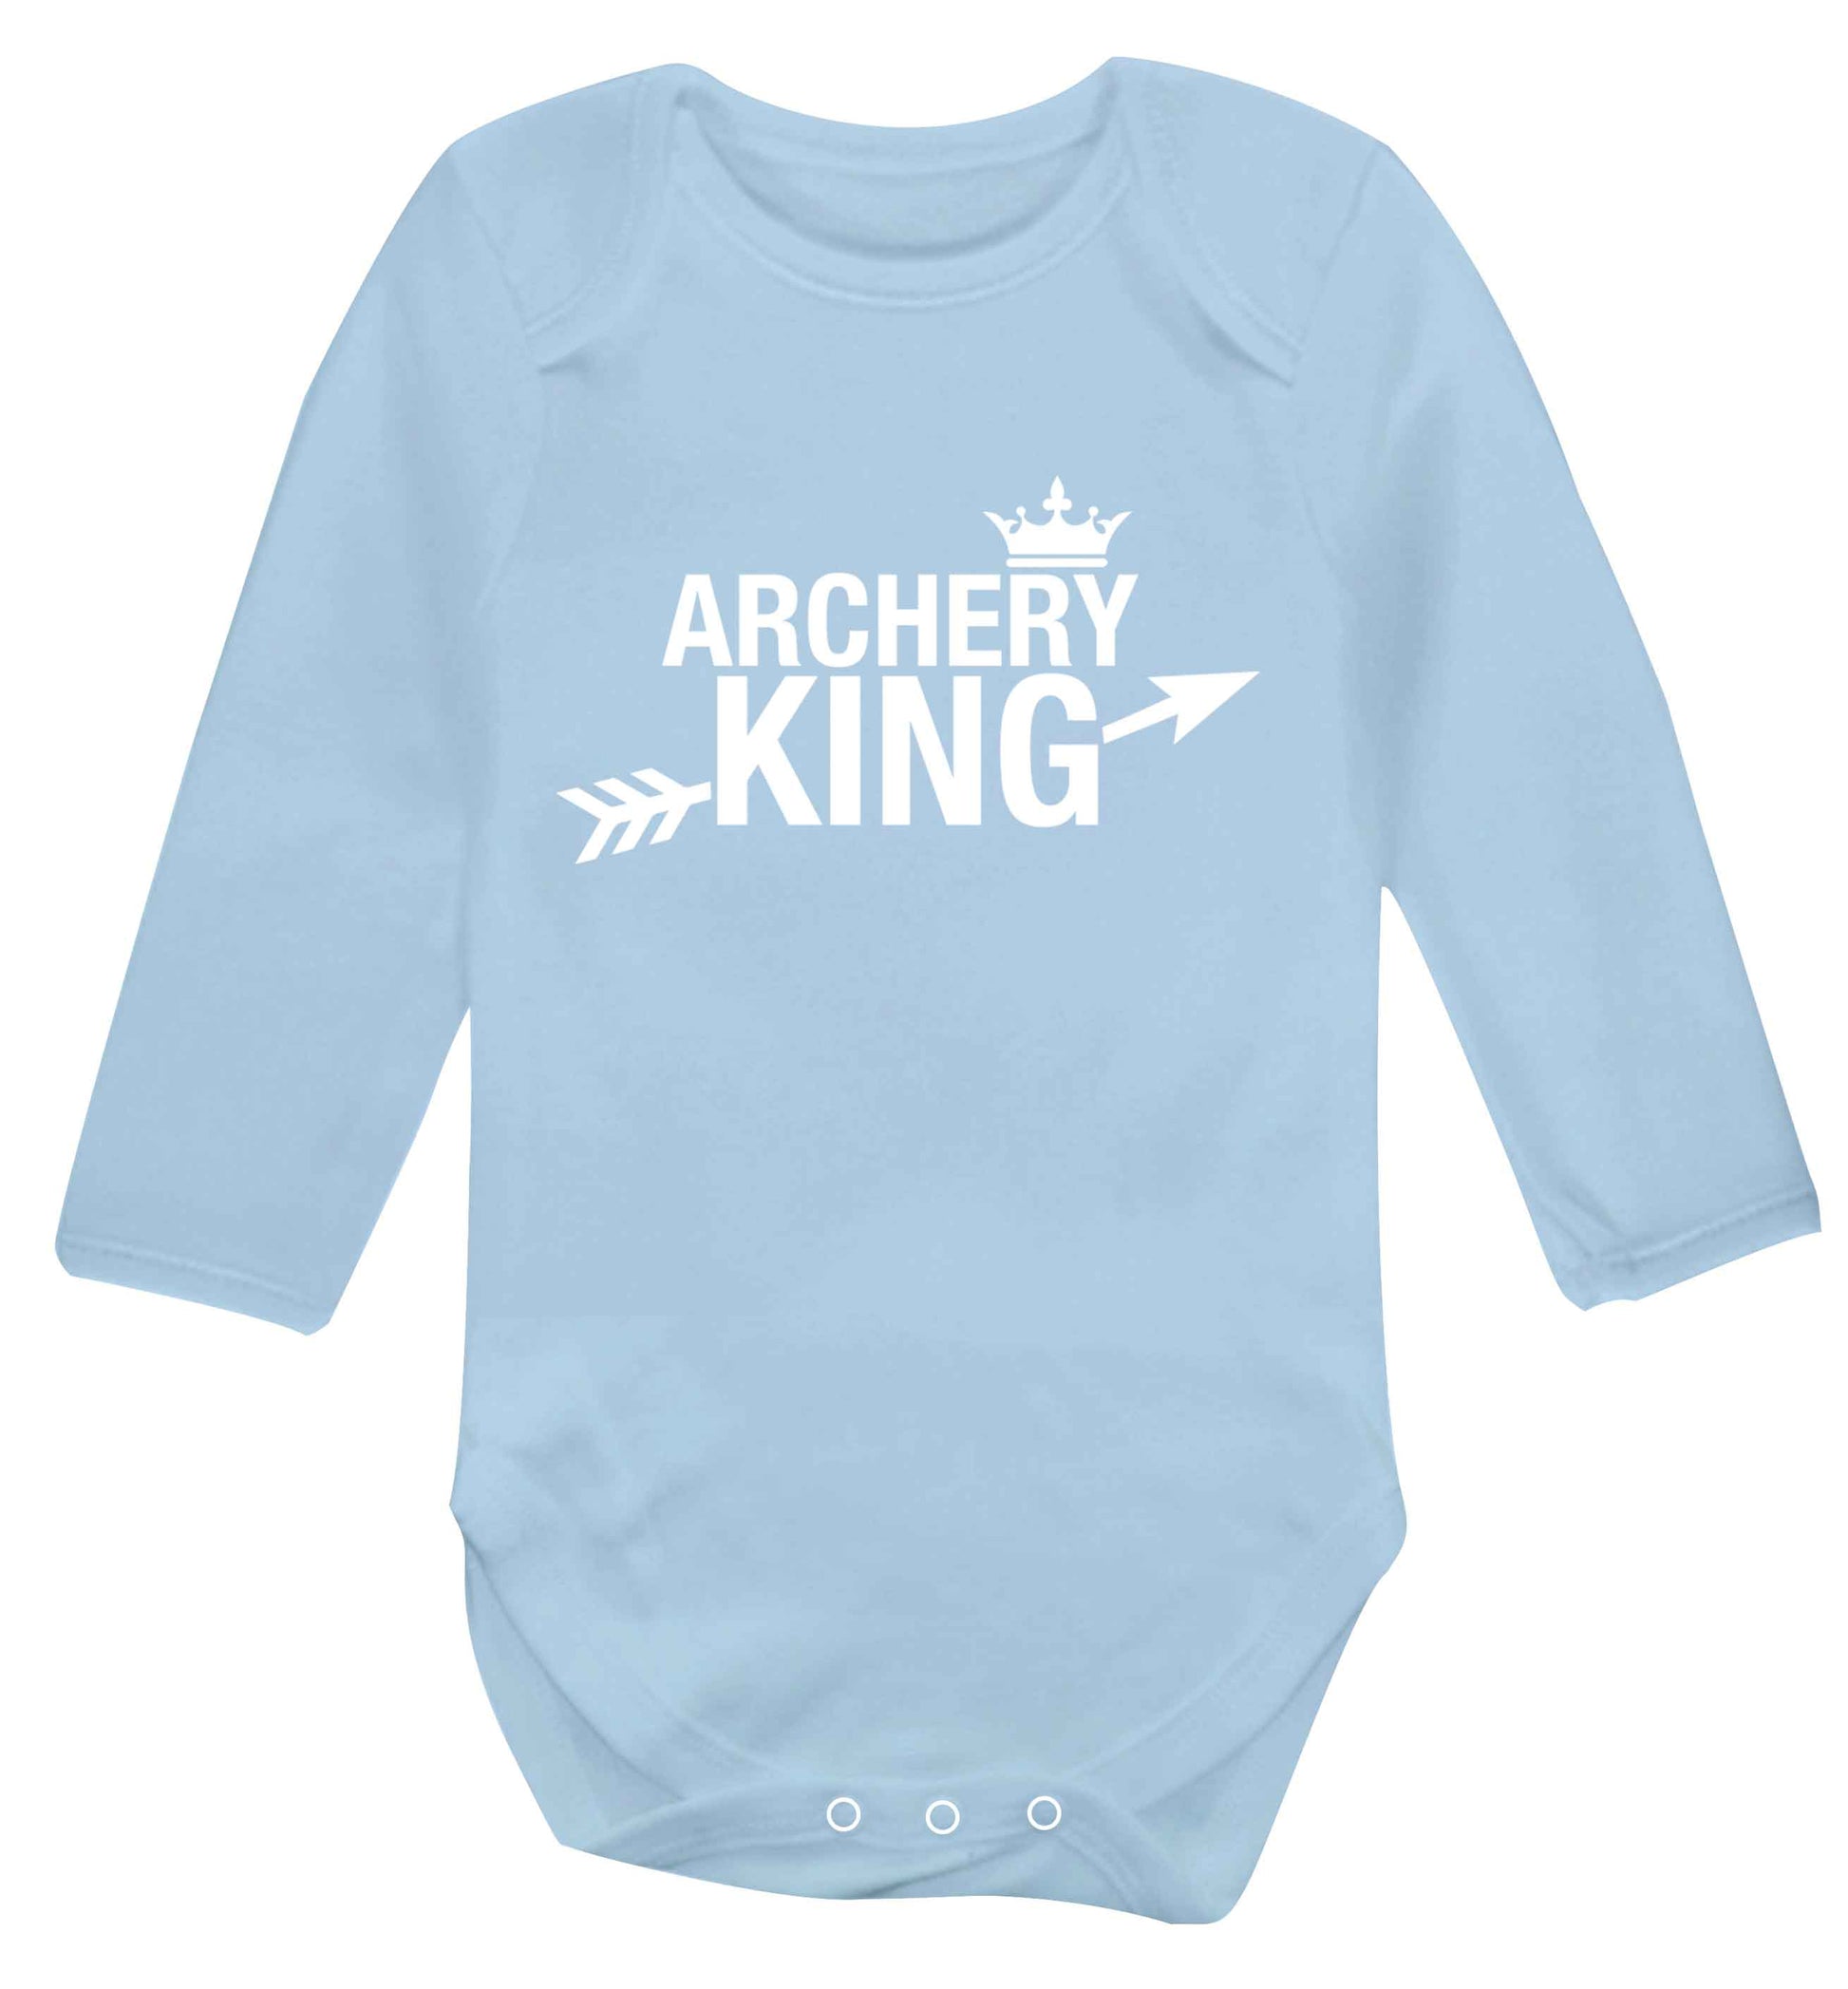 Archery king Baby Vest long sleeved pale blue 6-12 months